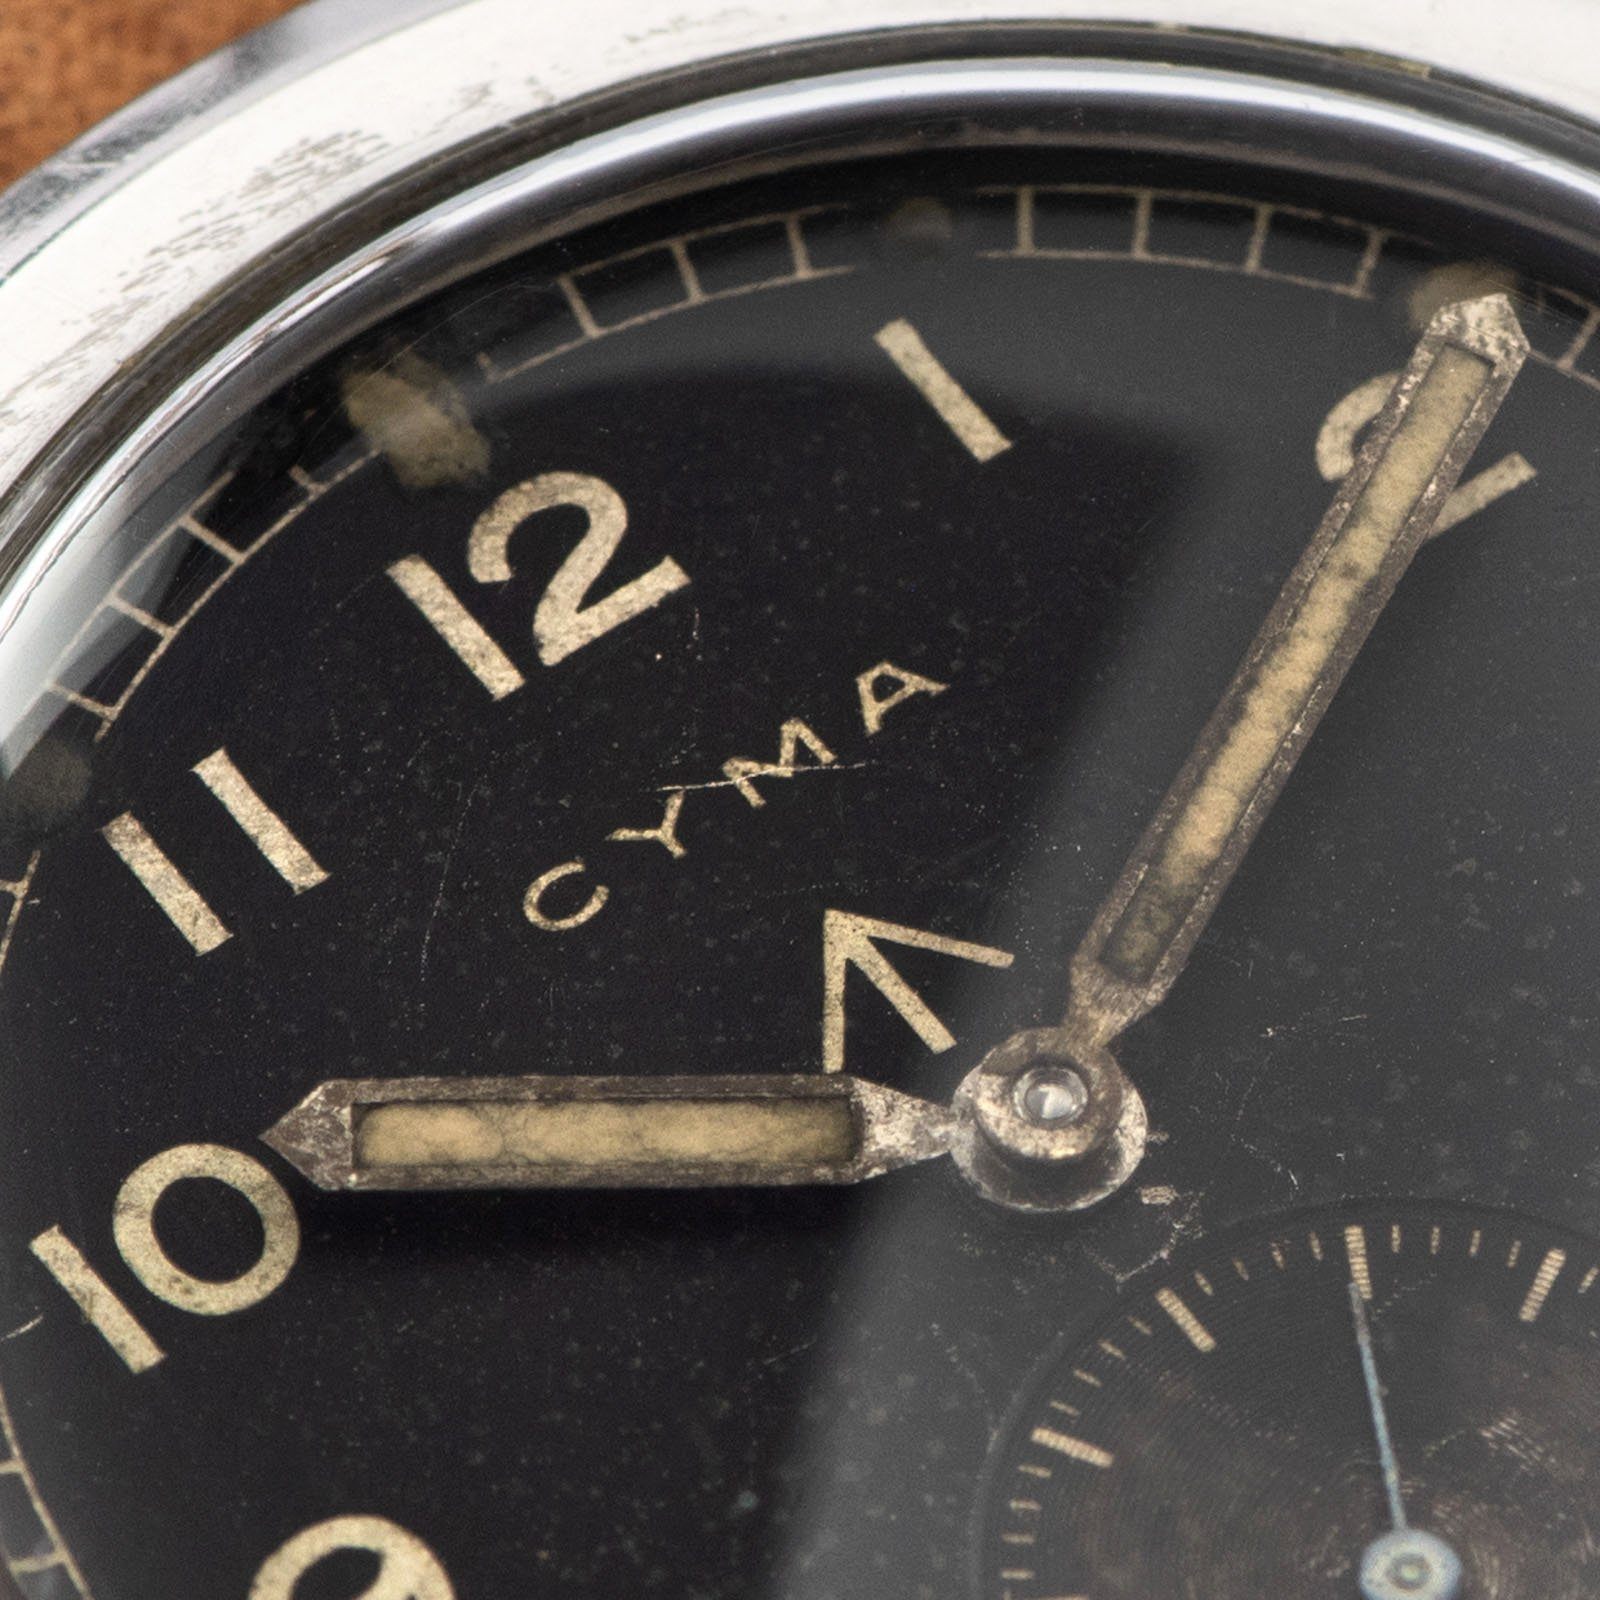 Cyma Issued Military Watch 1940s